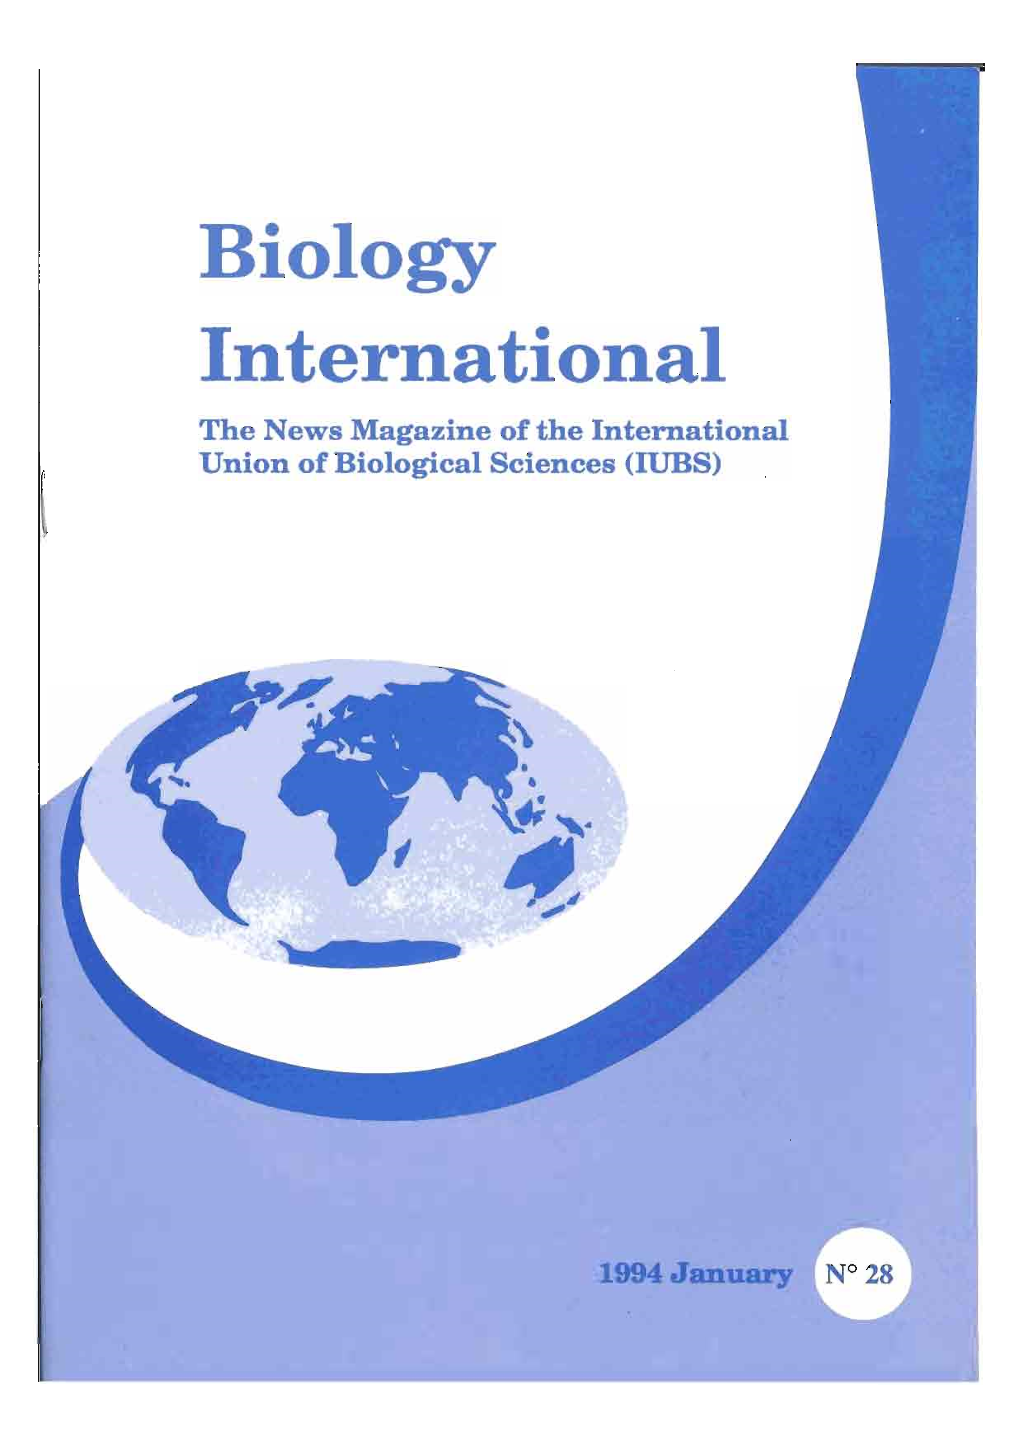 Biology International the News Magazine of the International Union of Biological Sciences (IUBS) CONTENTS (No28,1994)